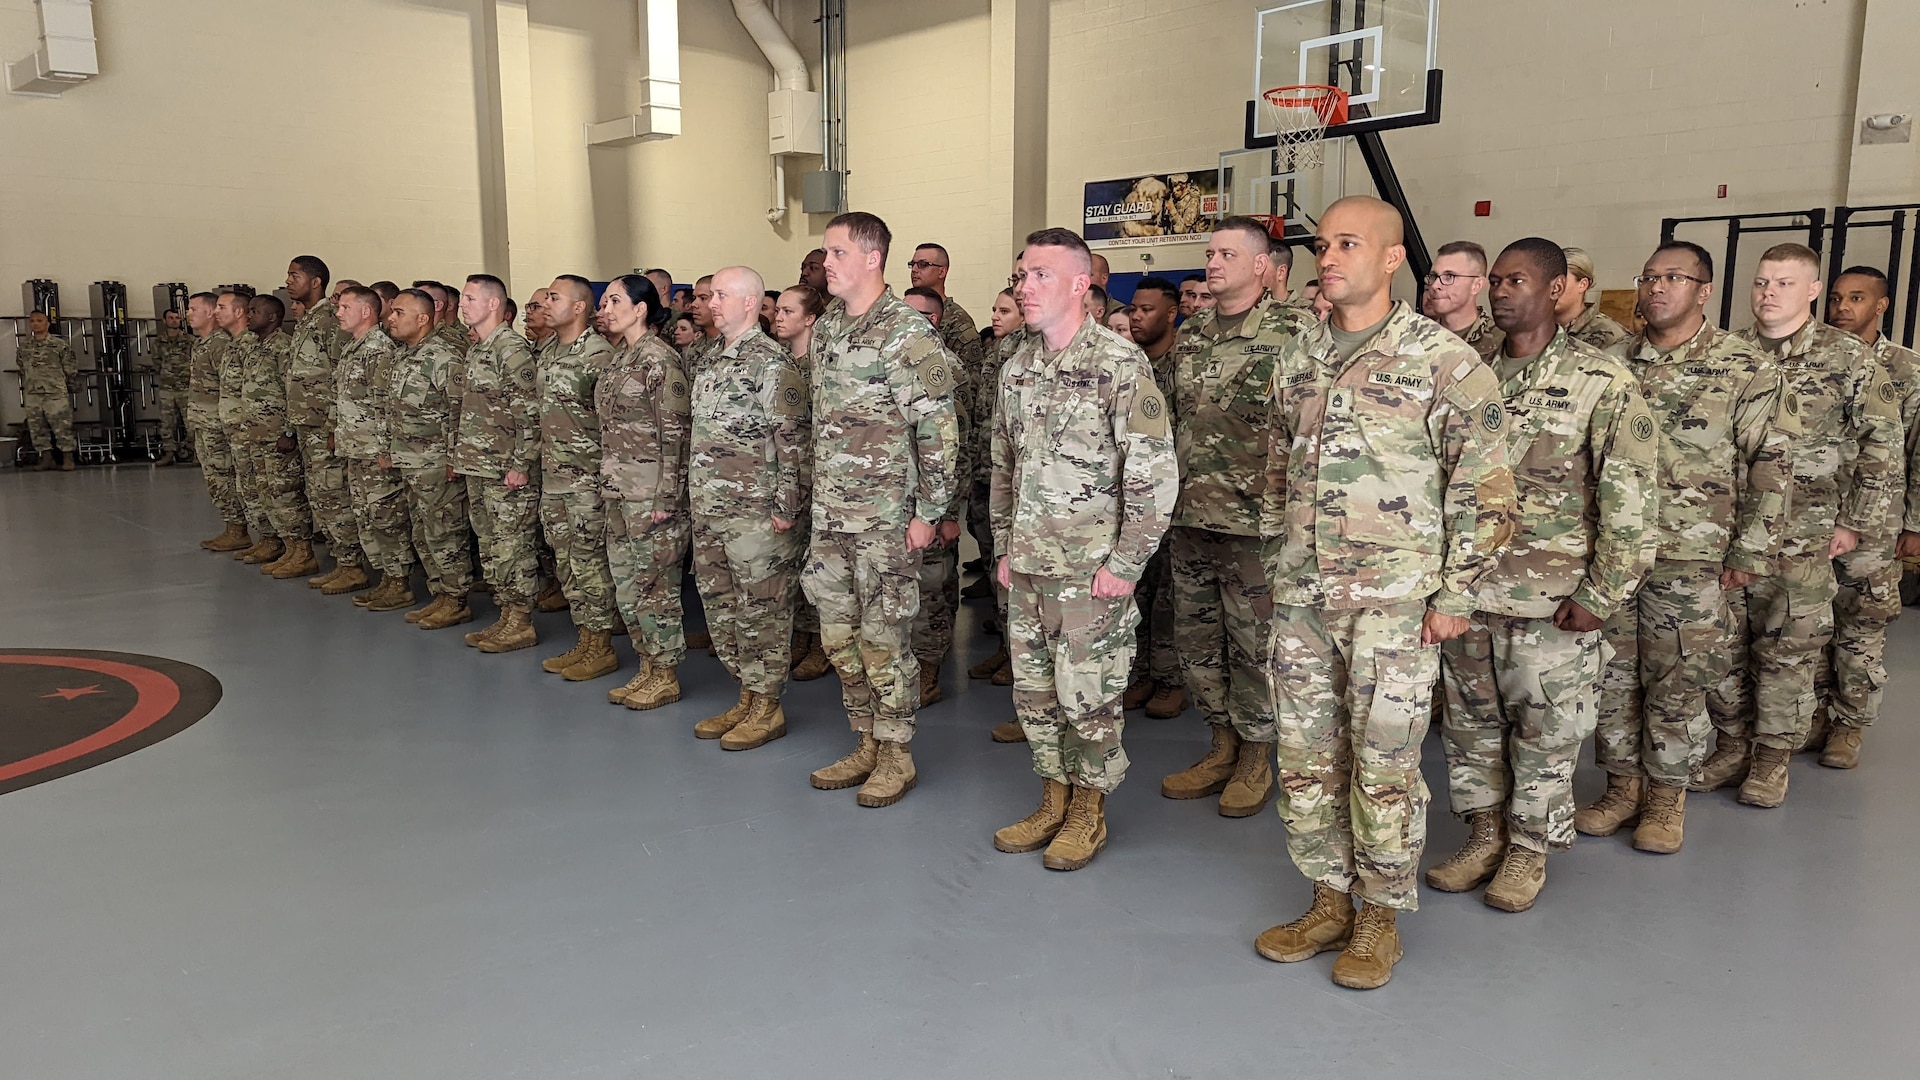 New York Army National Guard Soldiers of the 27th Infantry Brigade Combat Team, who are deploying to Germany as part of the Joint Multinational Training Group-Ukraine, stand at attention during a farewell ceremony at the Thompson Road Armory in Syracuse, New York, July 15, 2022. The New York Soldiers will relieve Florida Army National Guard Soldiers who are currently conducting the training mission.